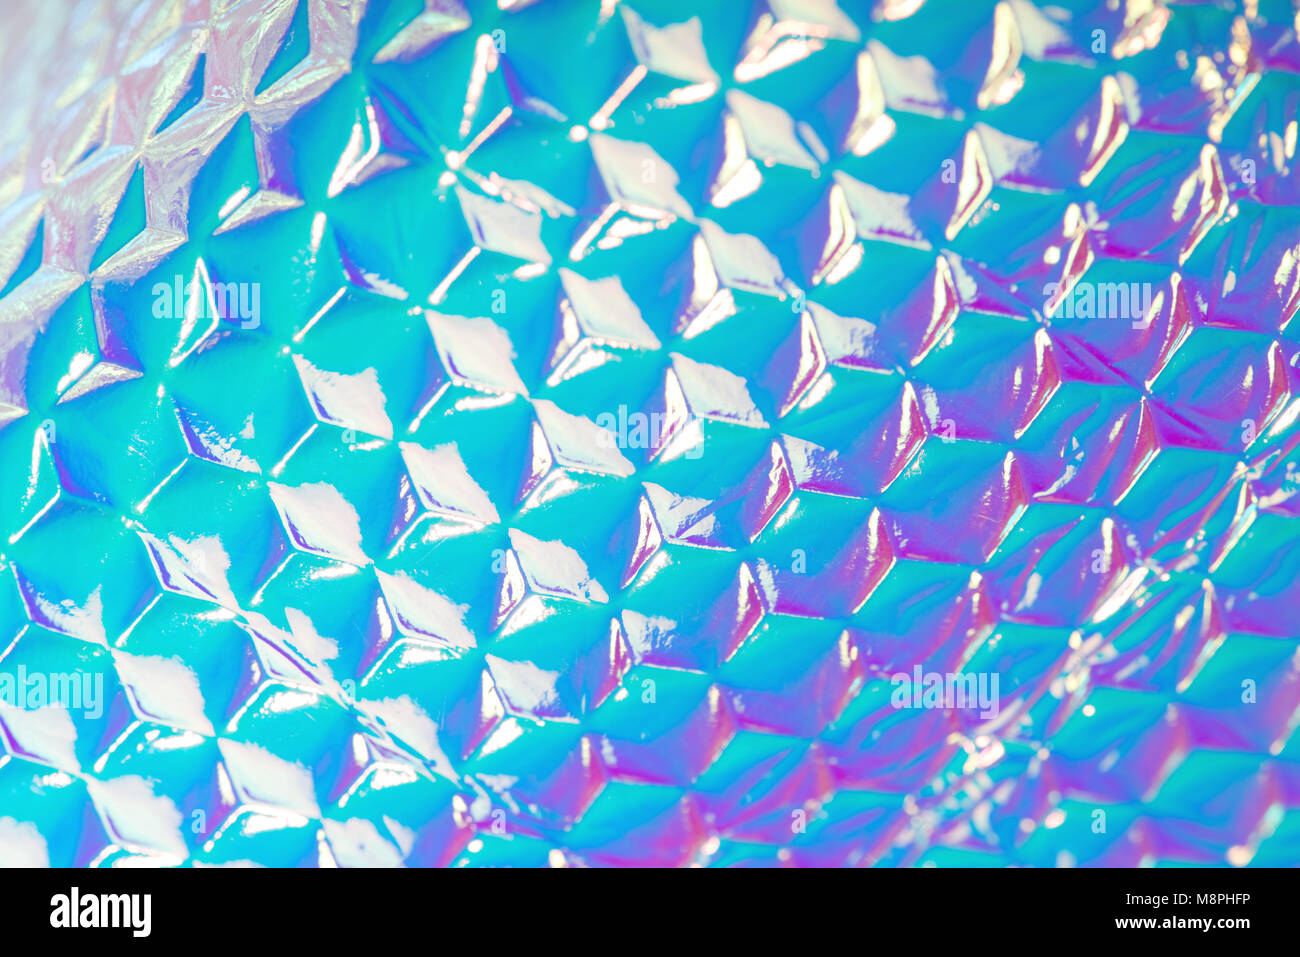 Holographic ultra violet foil creative background with geometric pattern. Stock Photo